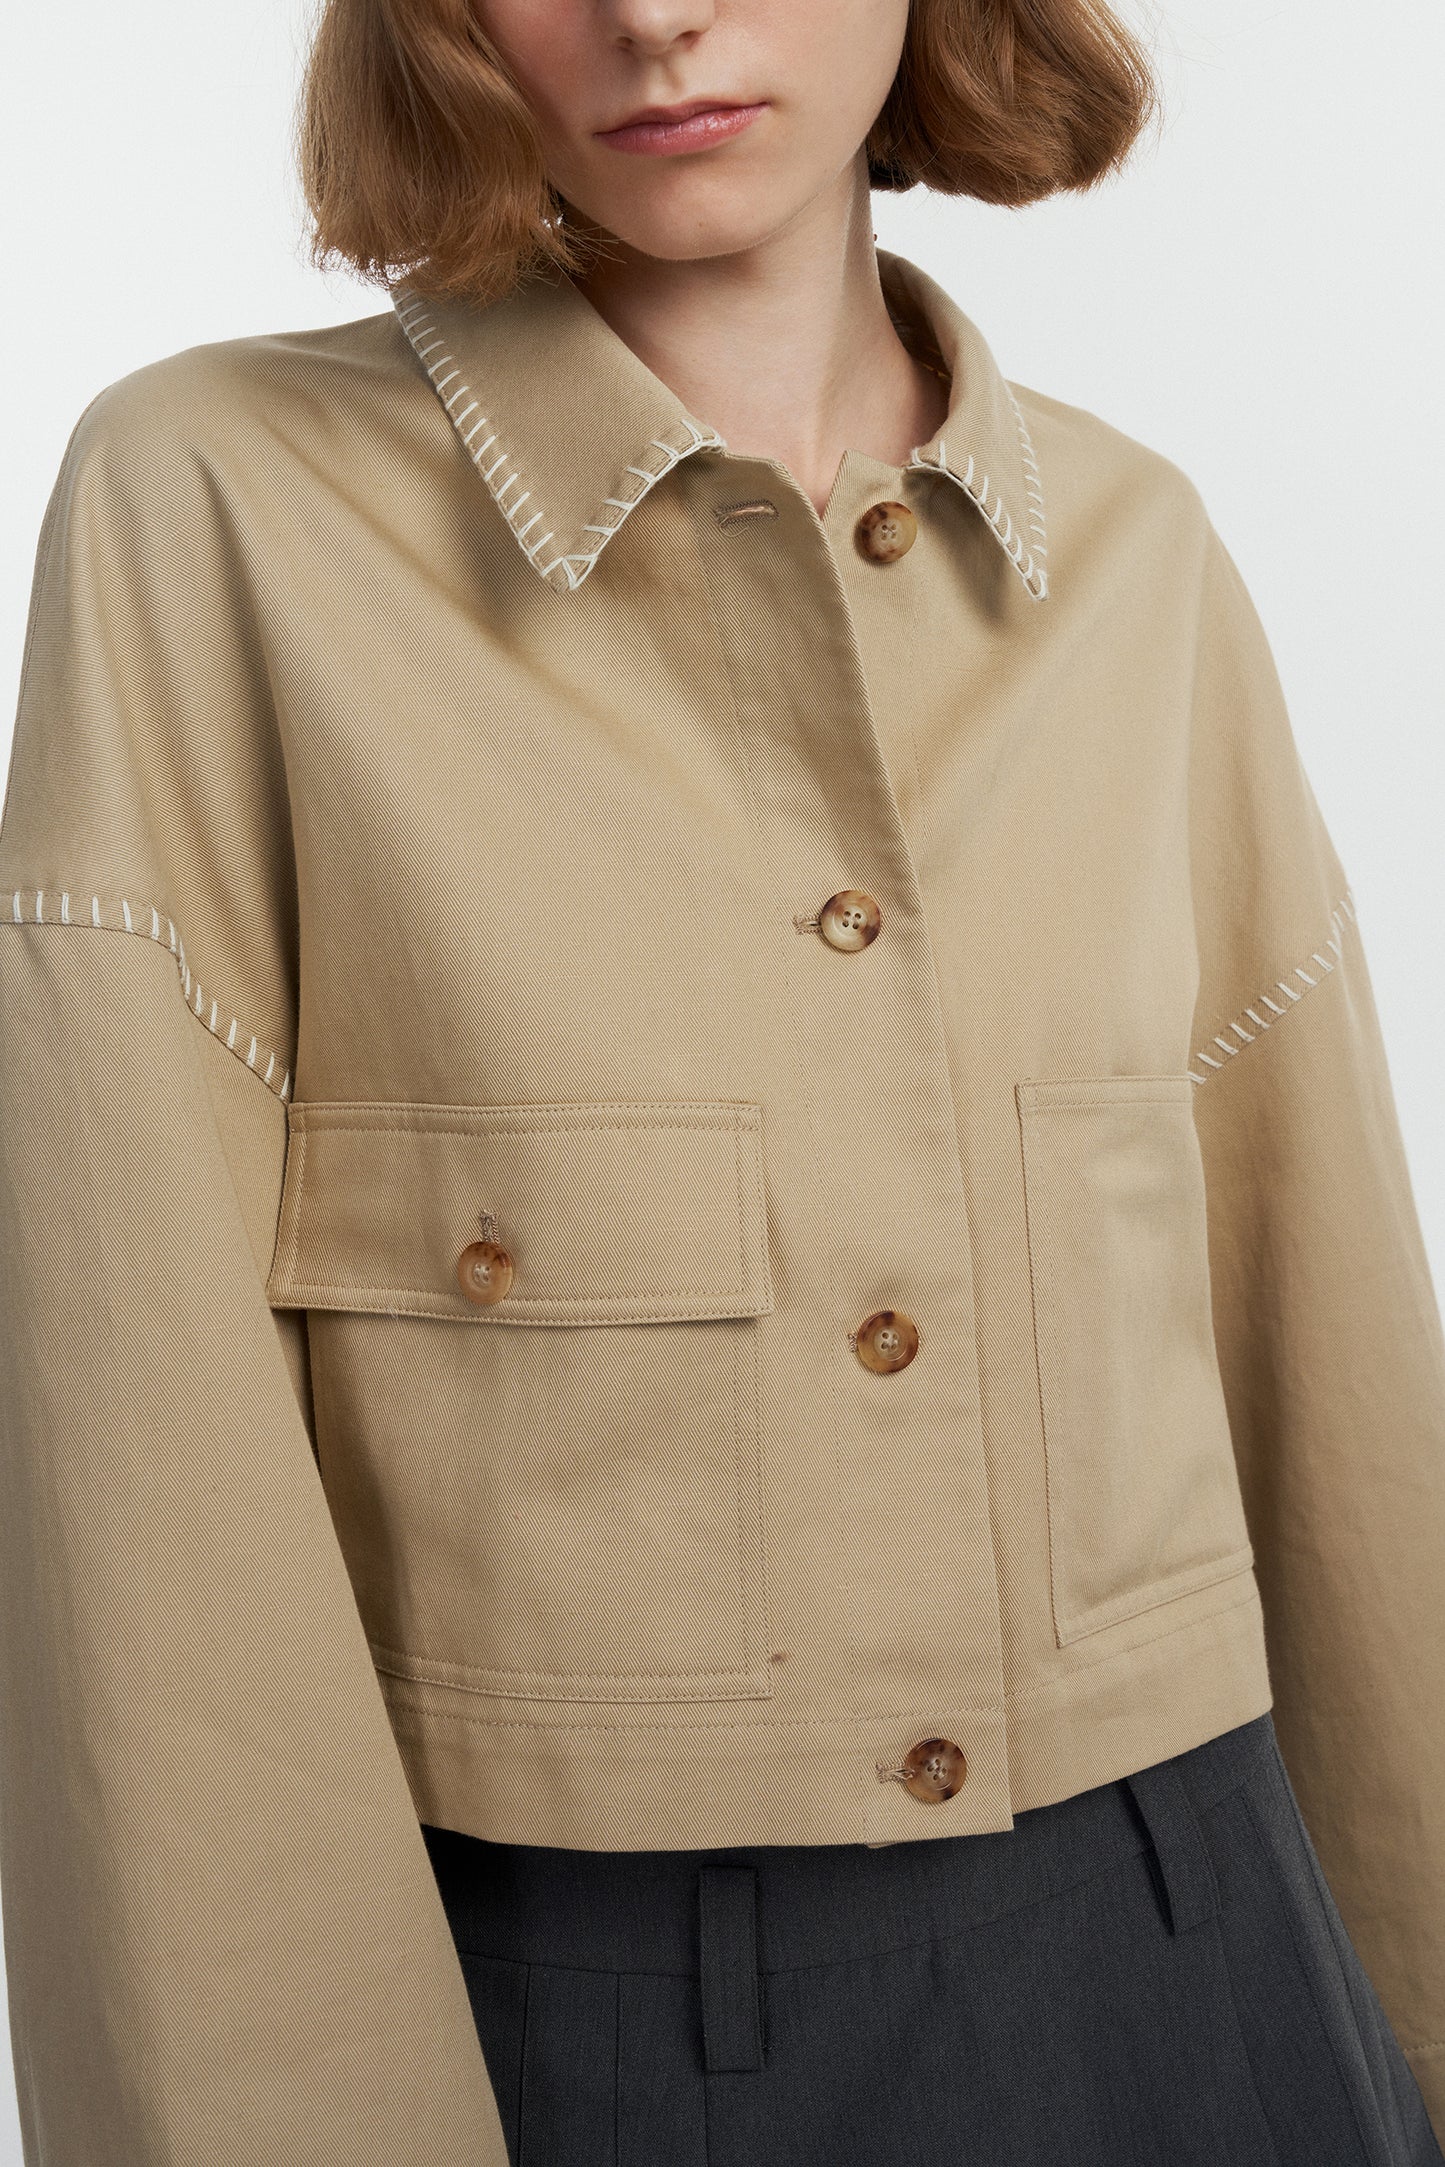 Louise Handcrafted Jacket in Cotton Blend